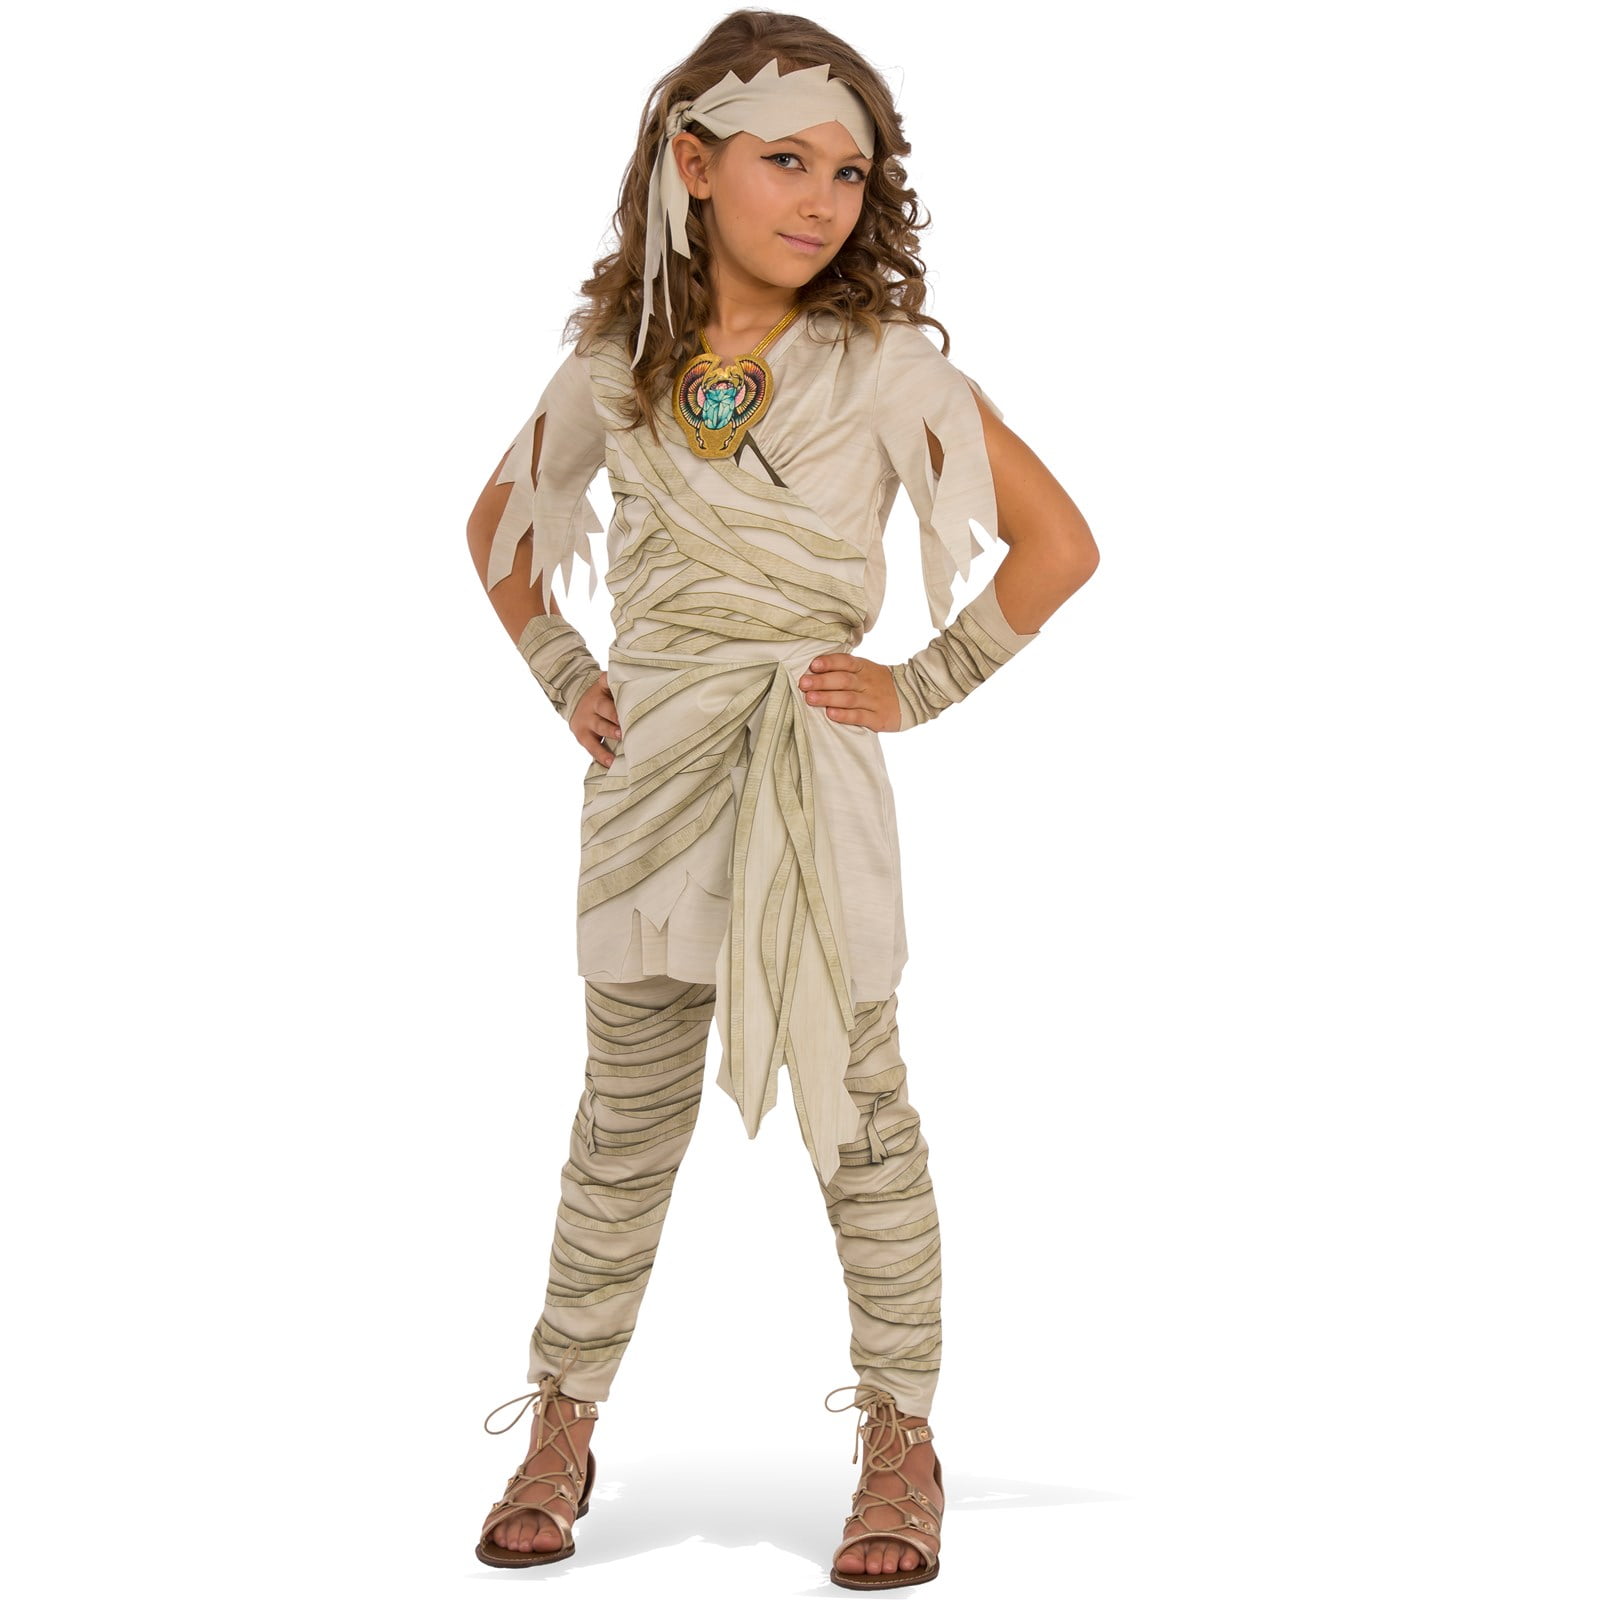 OFFICIAL STAR WARS DELUXE QUEEN AMIDALA GIRLS HALLOWEEN COSTUME SIZE LARGE 12-14 